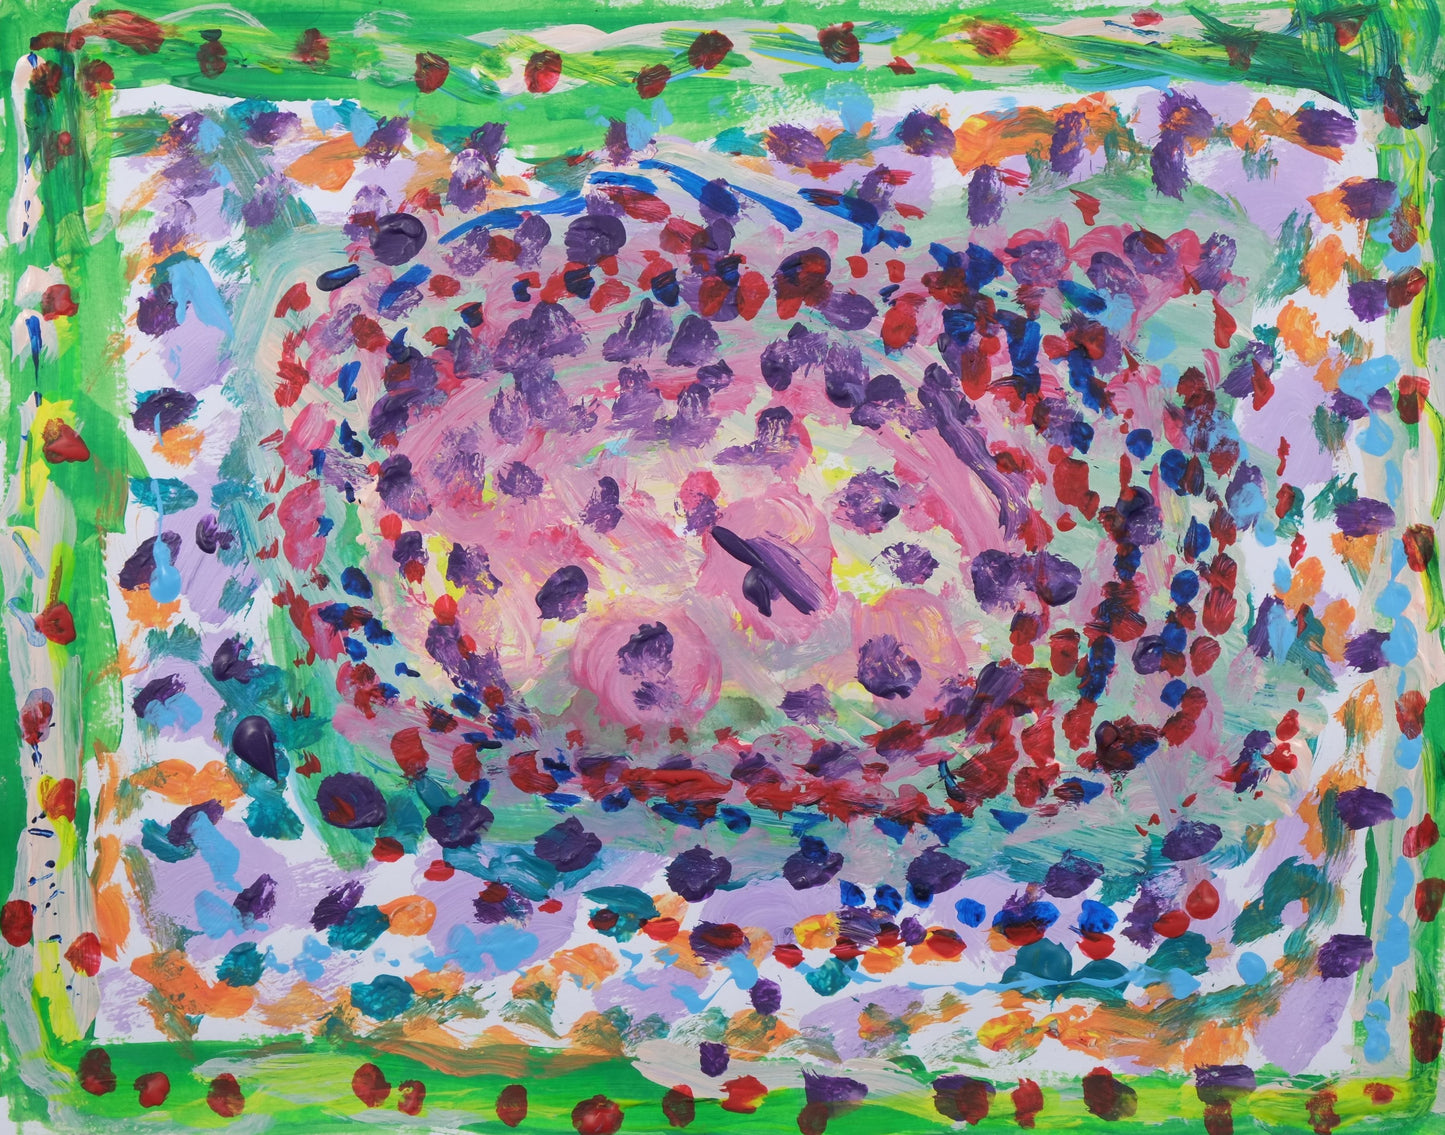 Abstract painting with borders green and the center being a light purple. Red, Blue, Purple dots all over